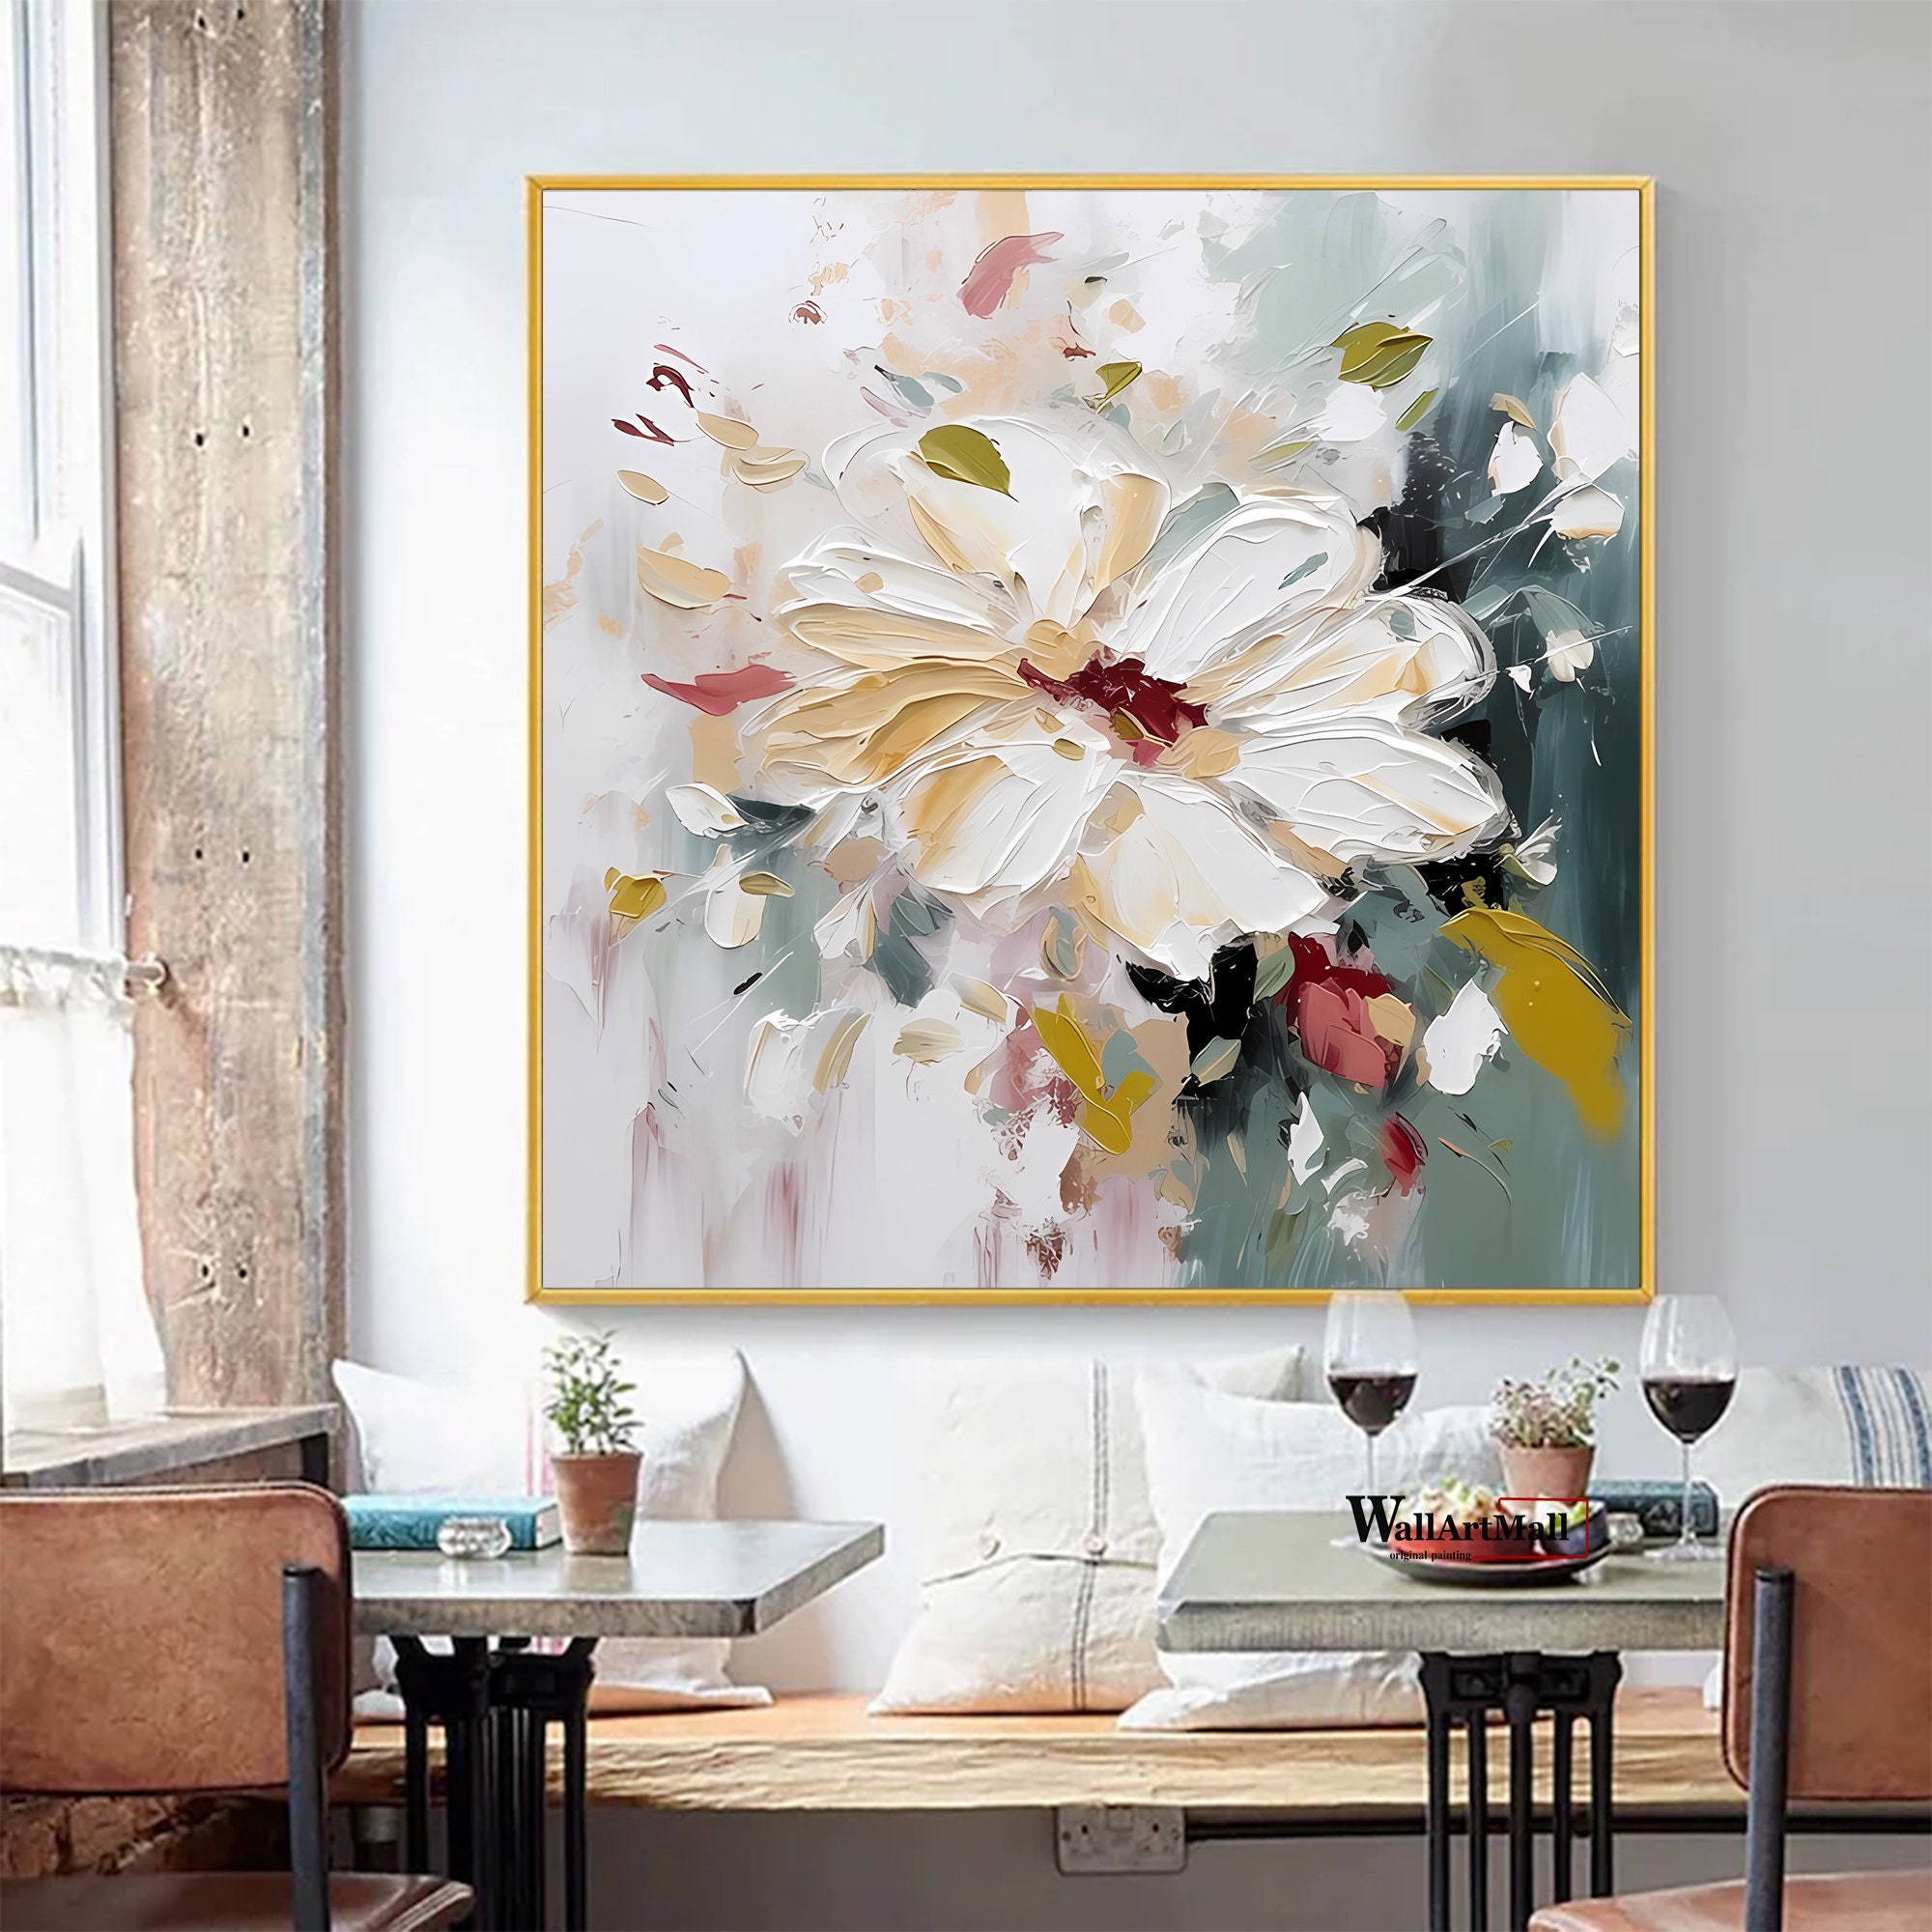 Large Original Flower Painting on Canvas Blooming Flower - Etsy